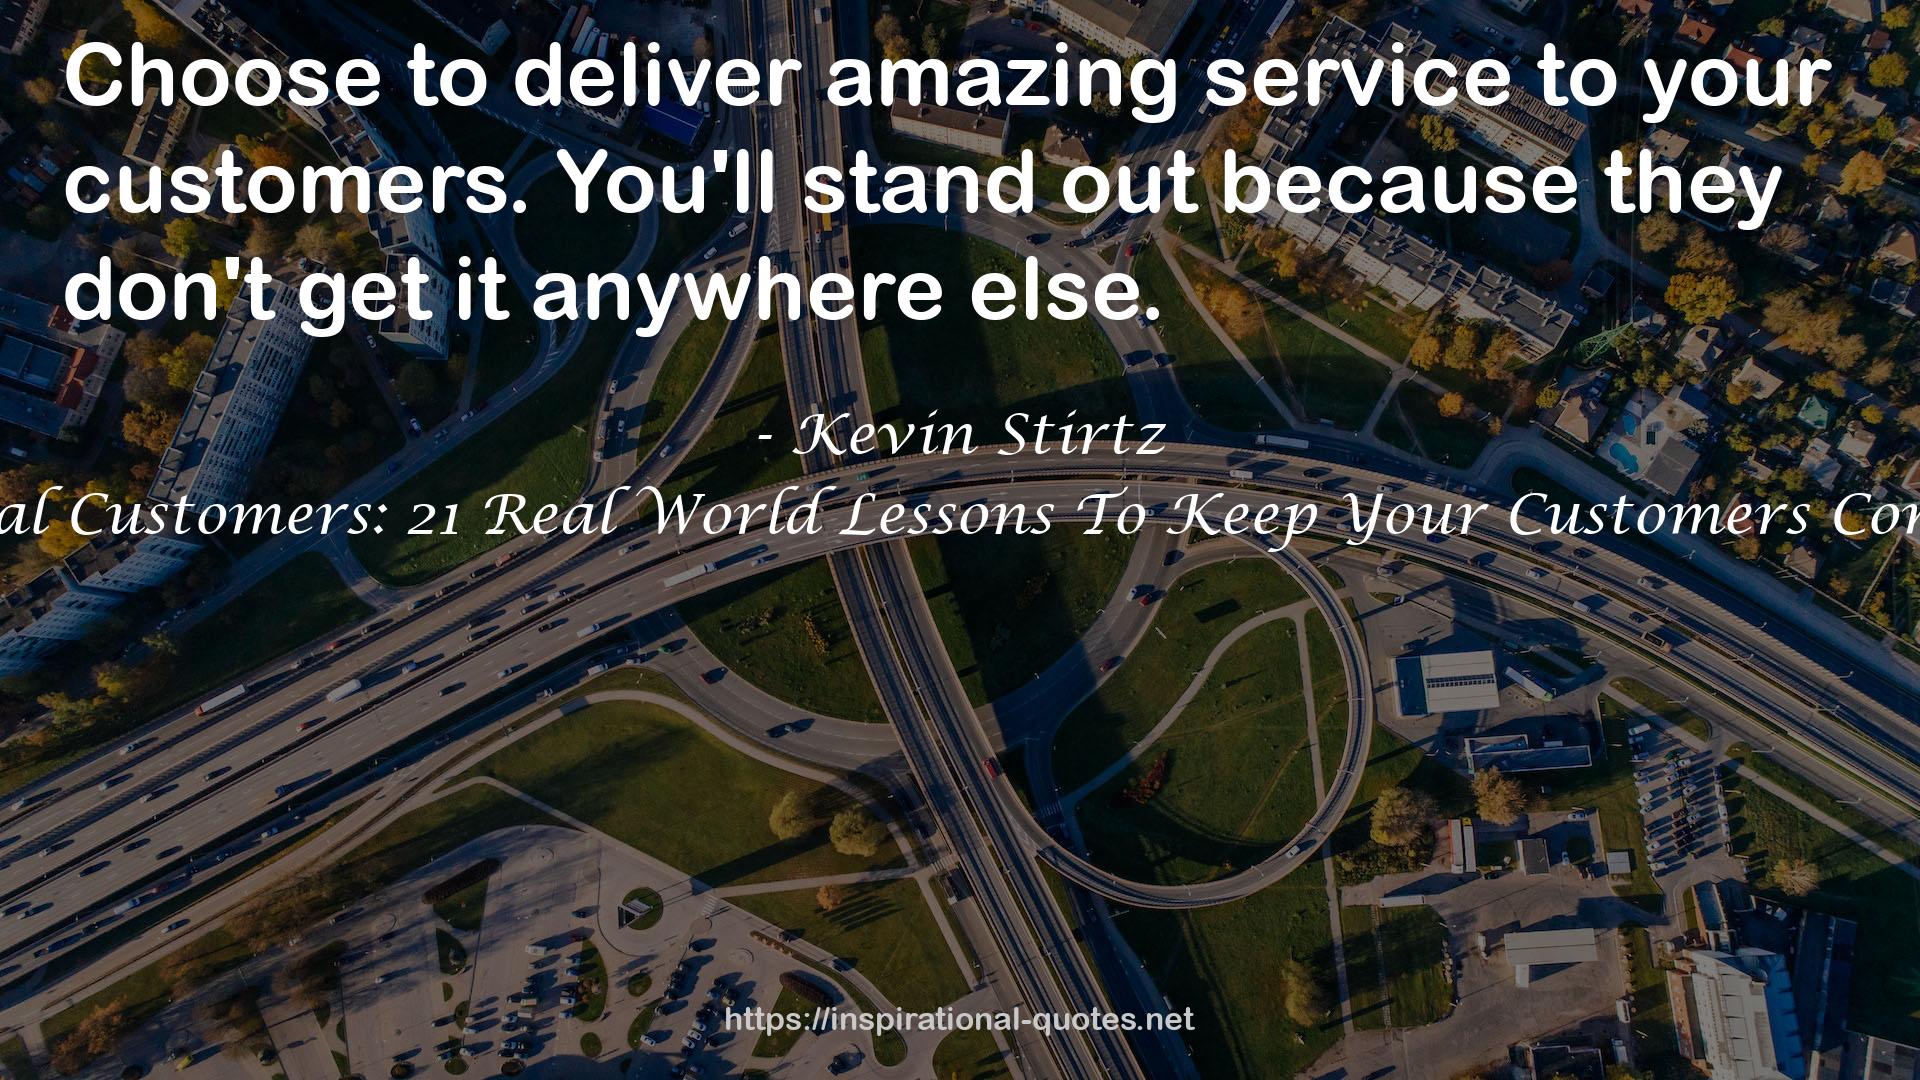 More Loyal Customers: 21 Real World Lessons To Keep Your Customers Coming Back QUOTES